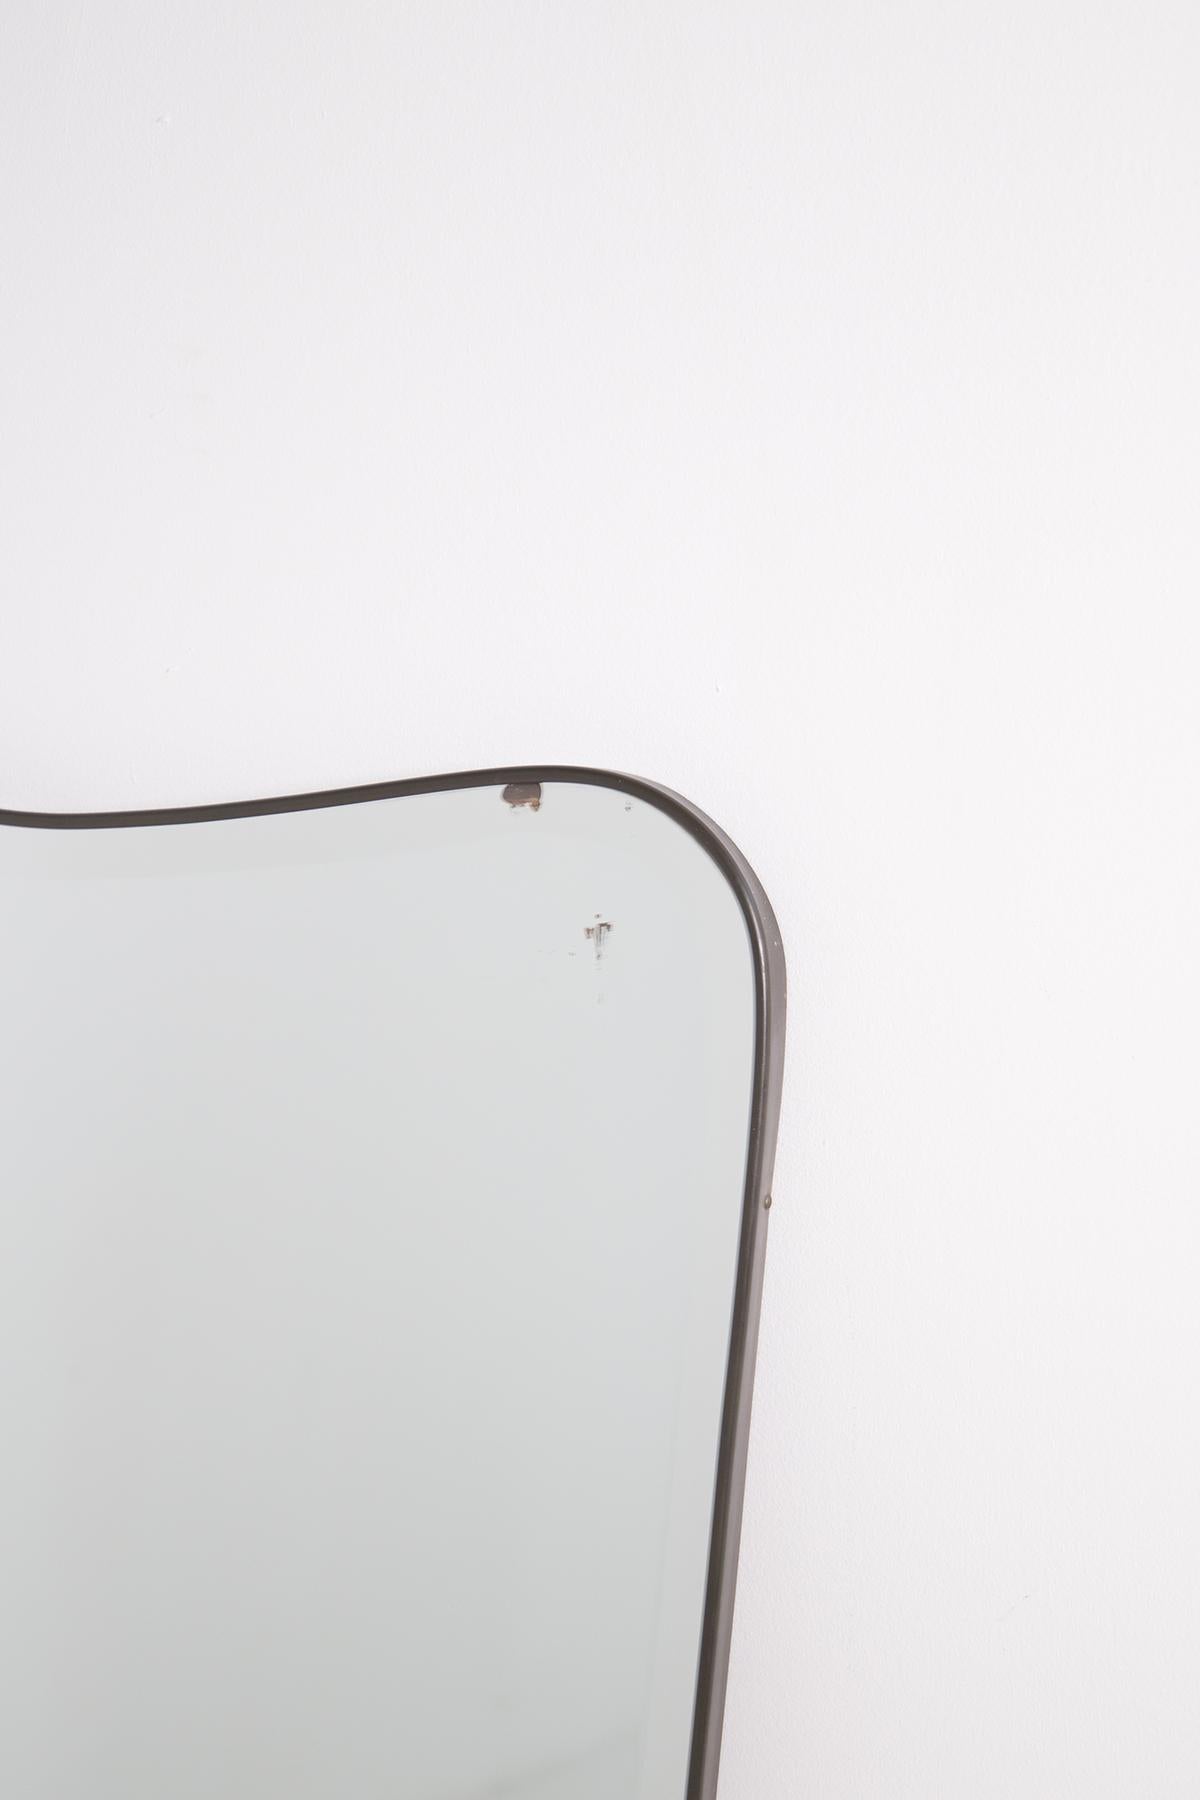 Mid-Century Modern Italian Antique Mirror Attributed to Gio Ponti in Brass and Mirror